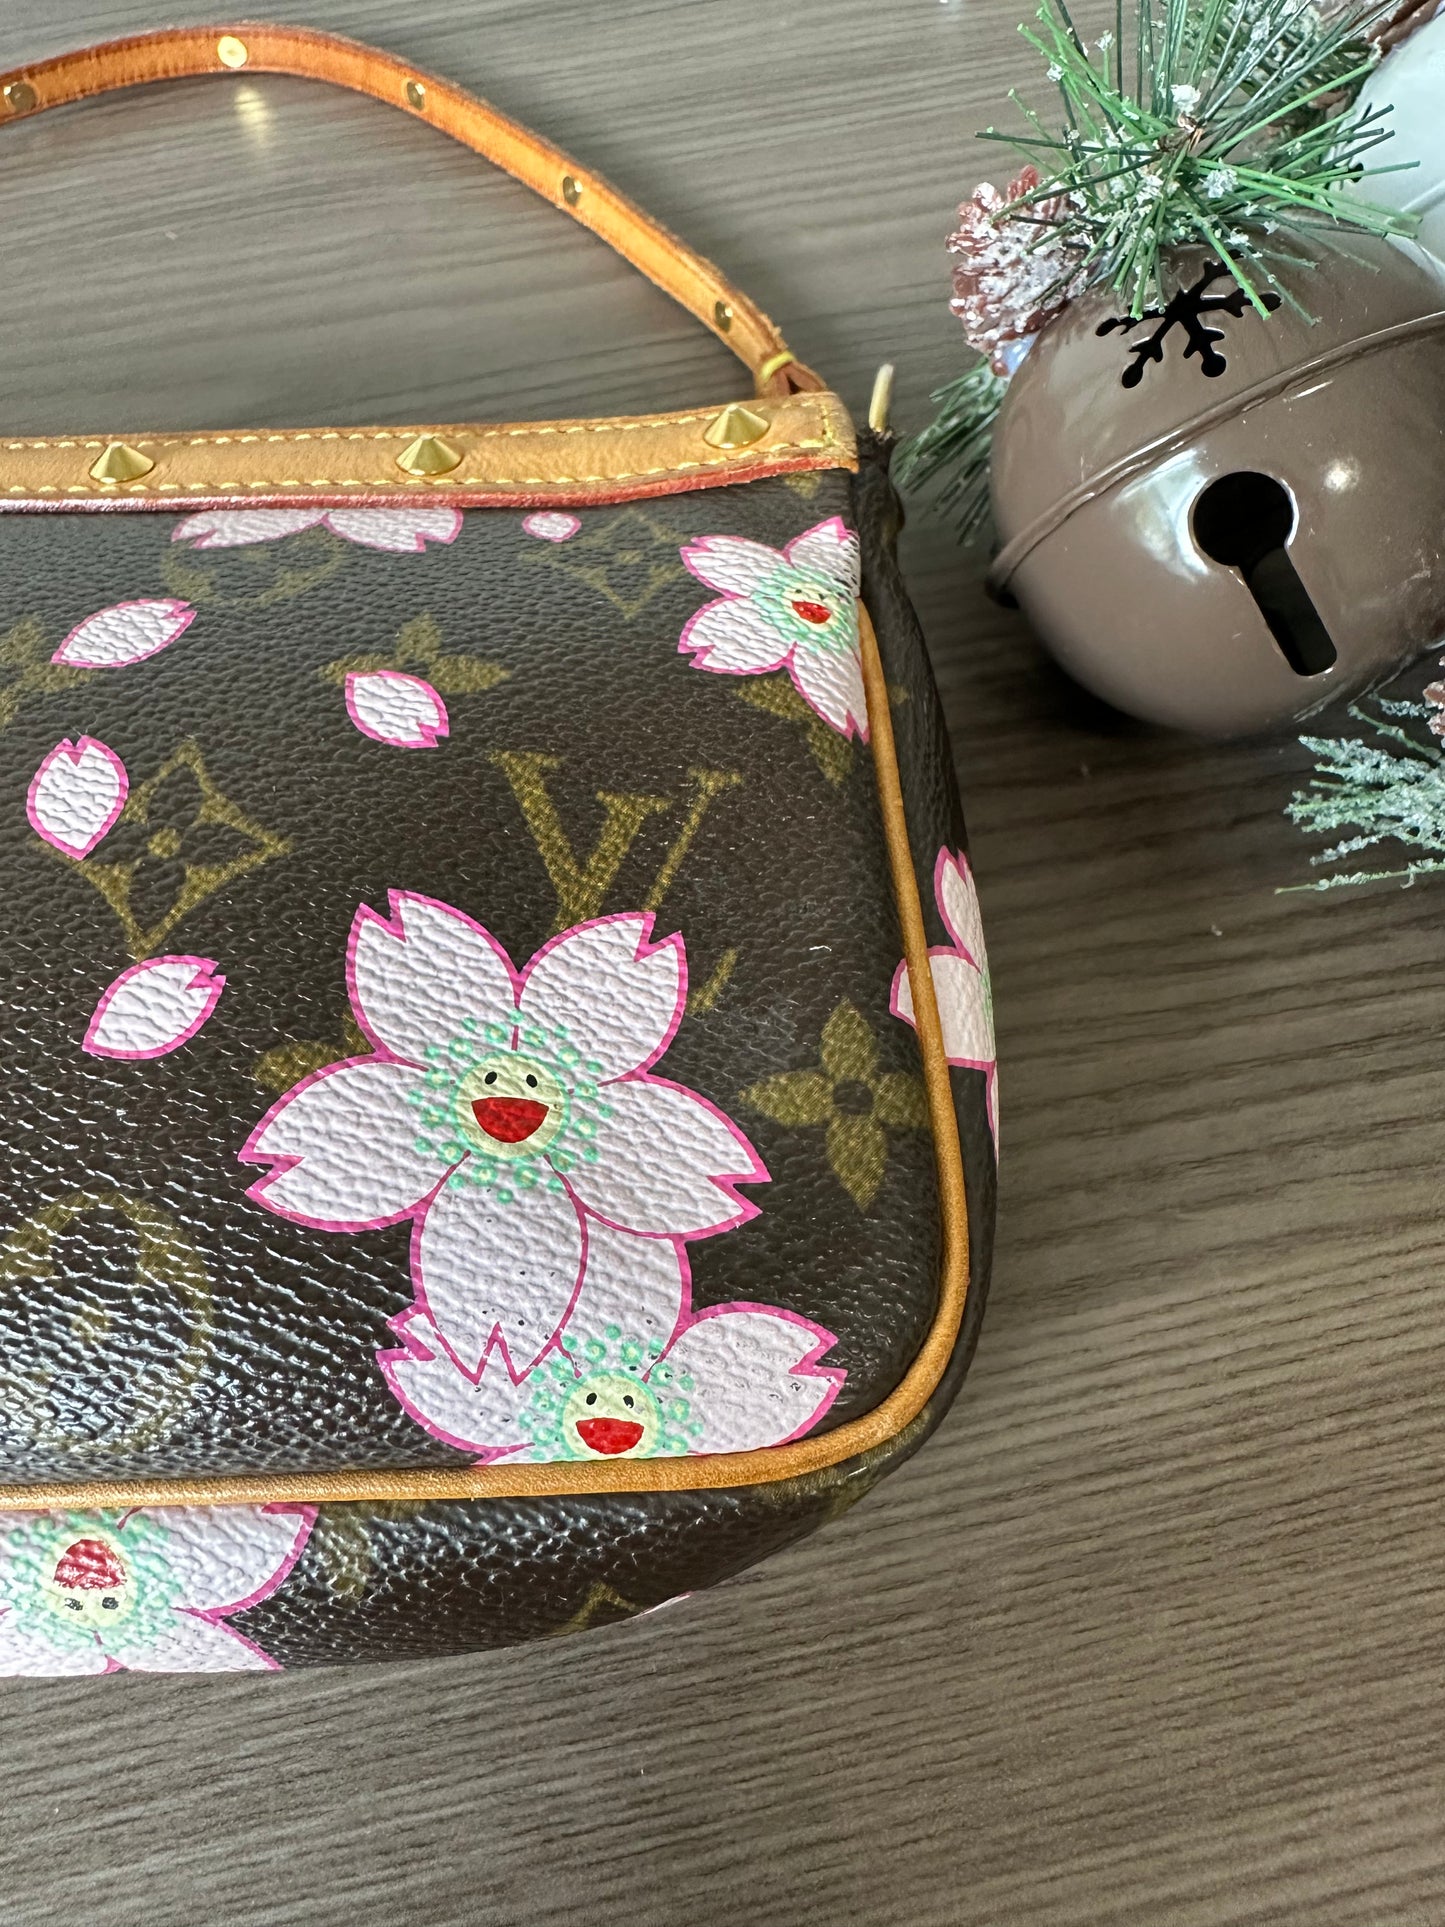 After 18 years, I finally got my ultimate holy grail bag! The Murakami pink  cherry blossom pochette 🌸🌸 : r/Louisvuitton